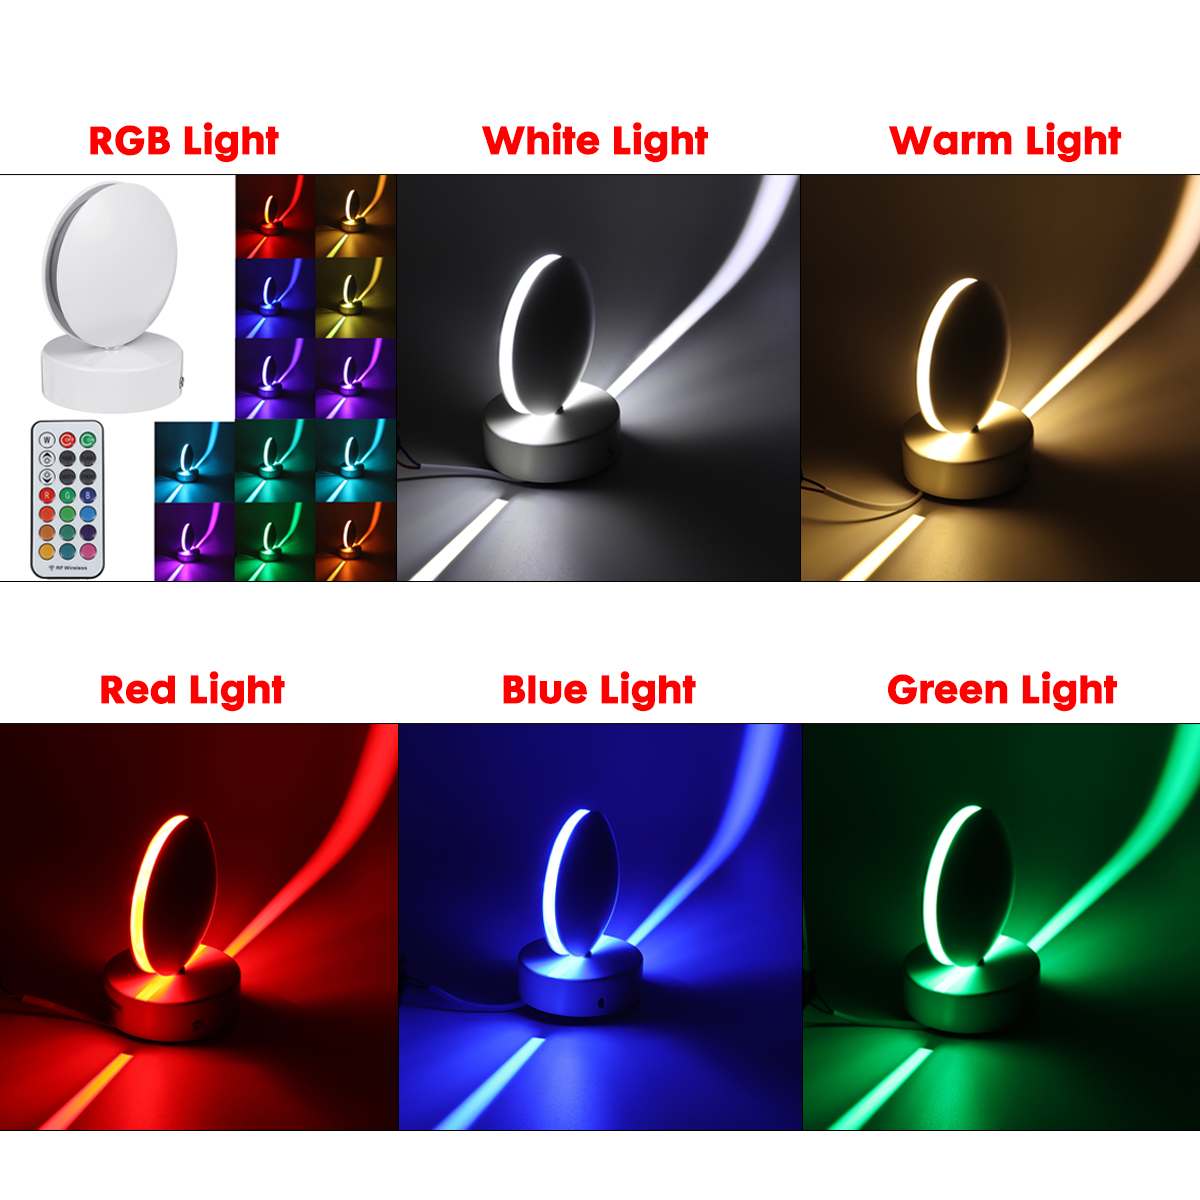 LED 10W Indoor Window Sill Light 360 Degree RGB LED Wall Lamps Remote Frame Light For Door Frame Wall KTV Hotel Bar Corridor